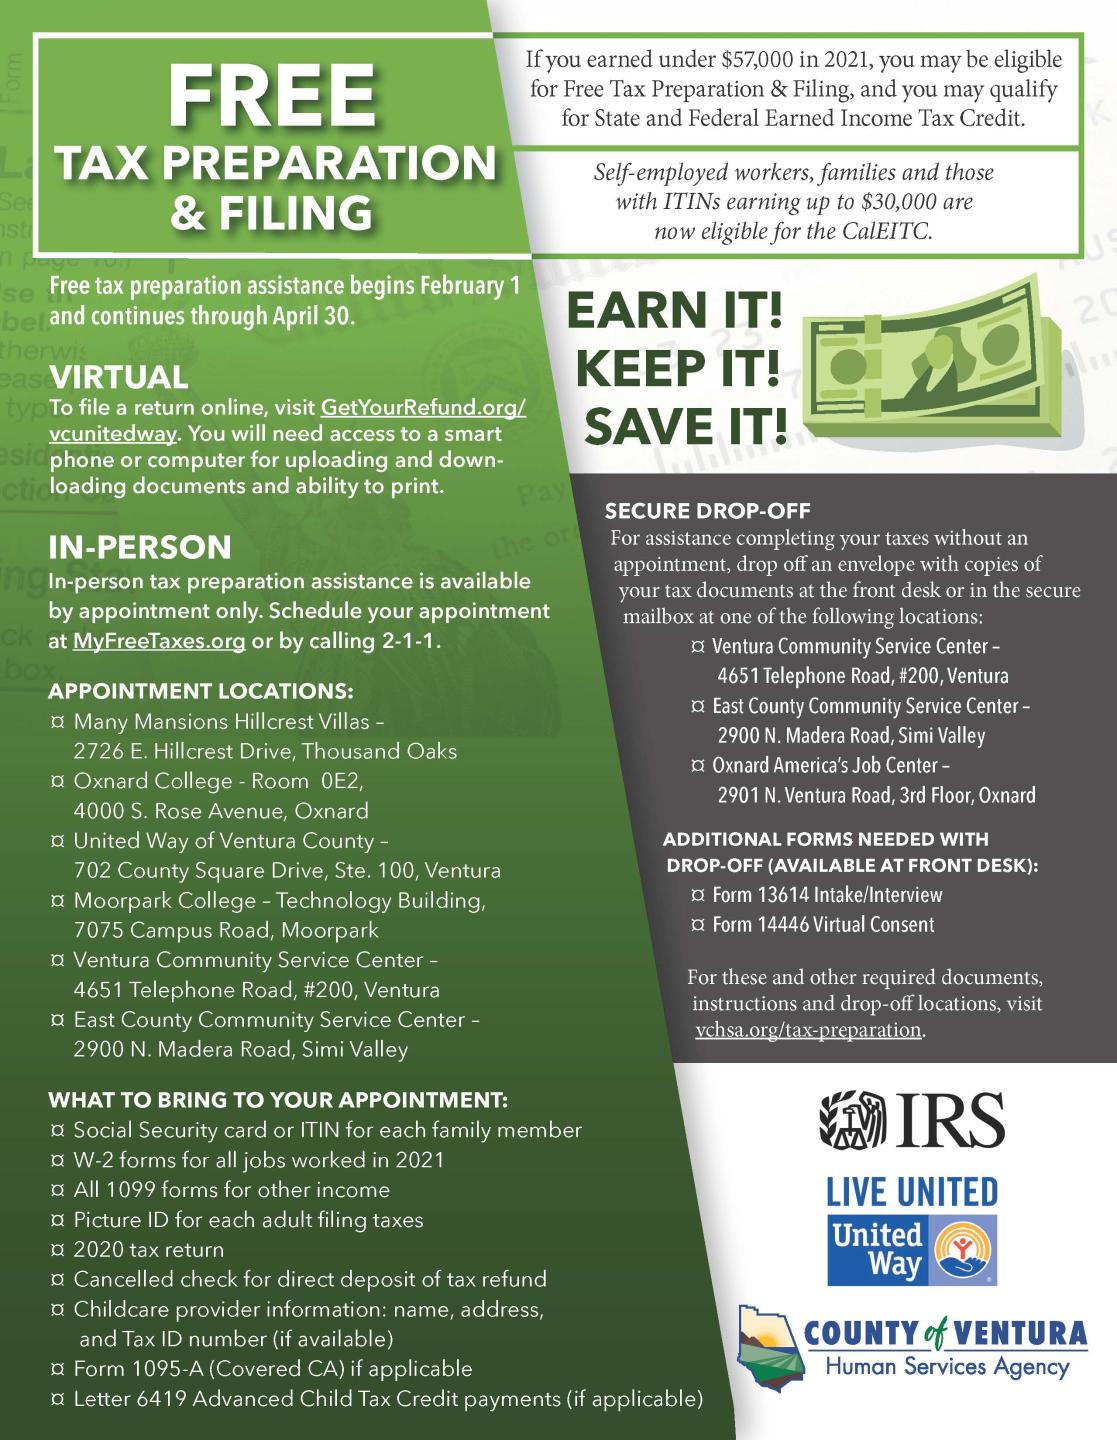 Free Tax Services